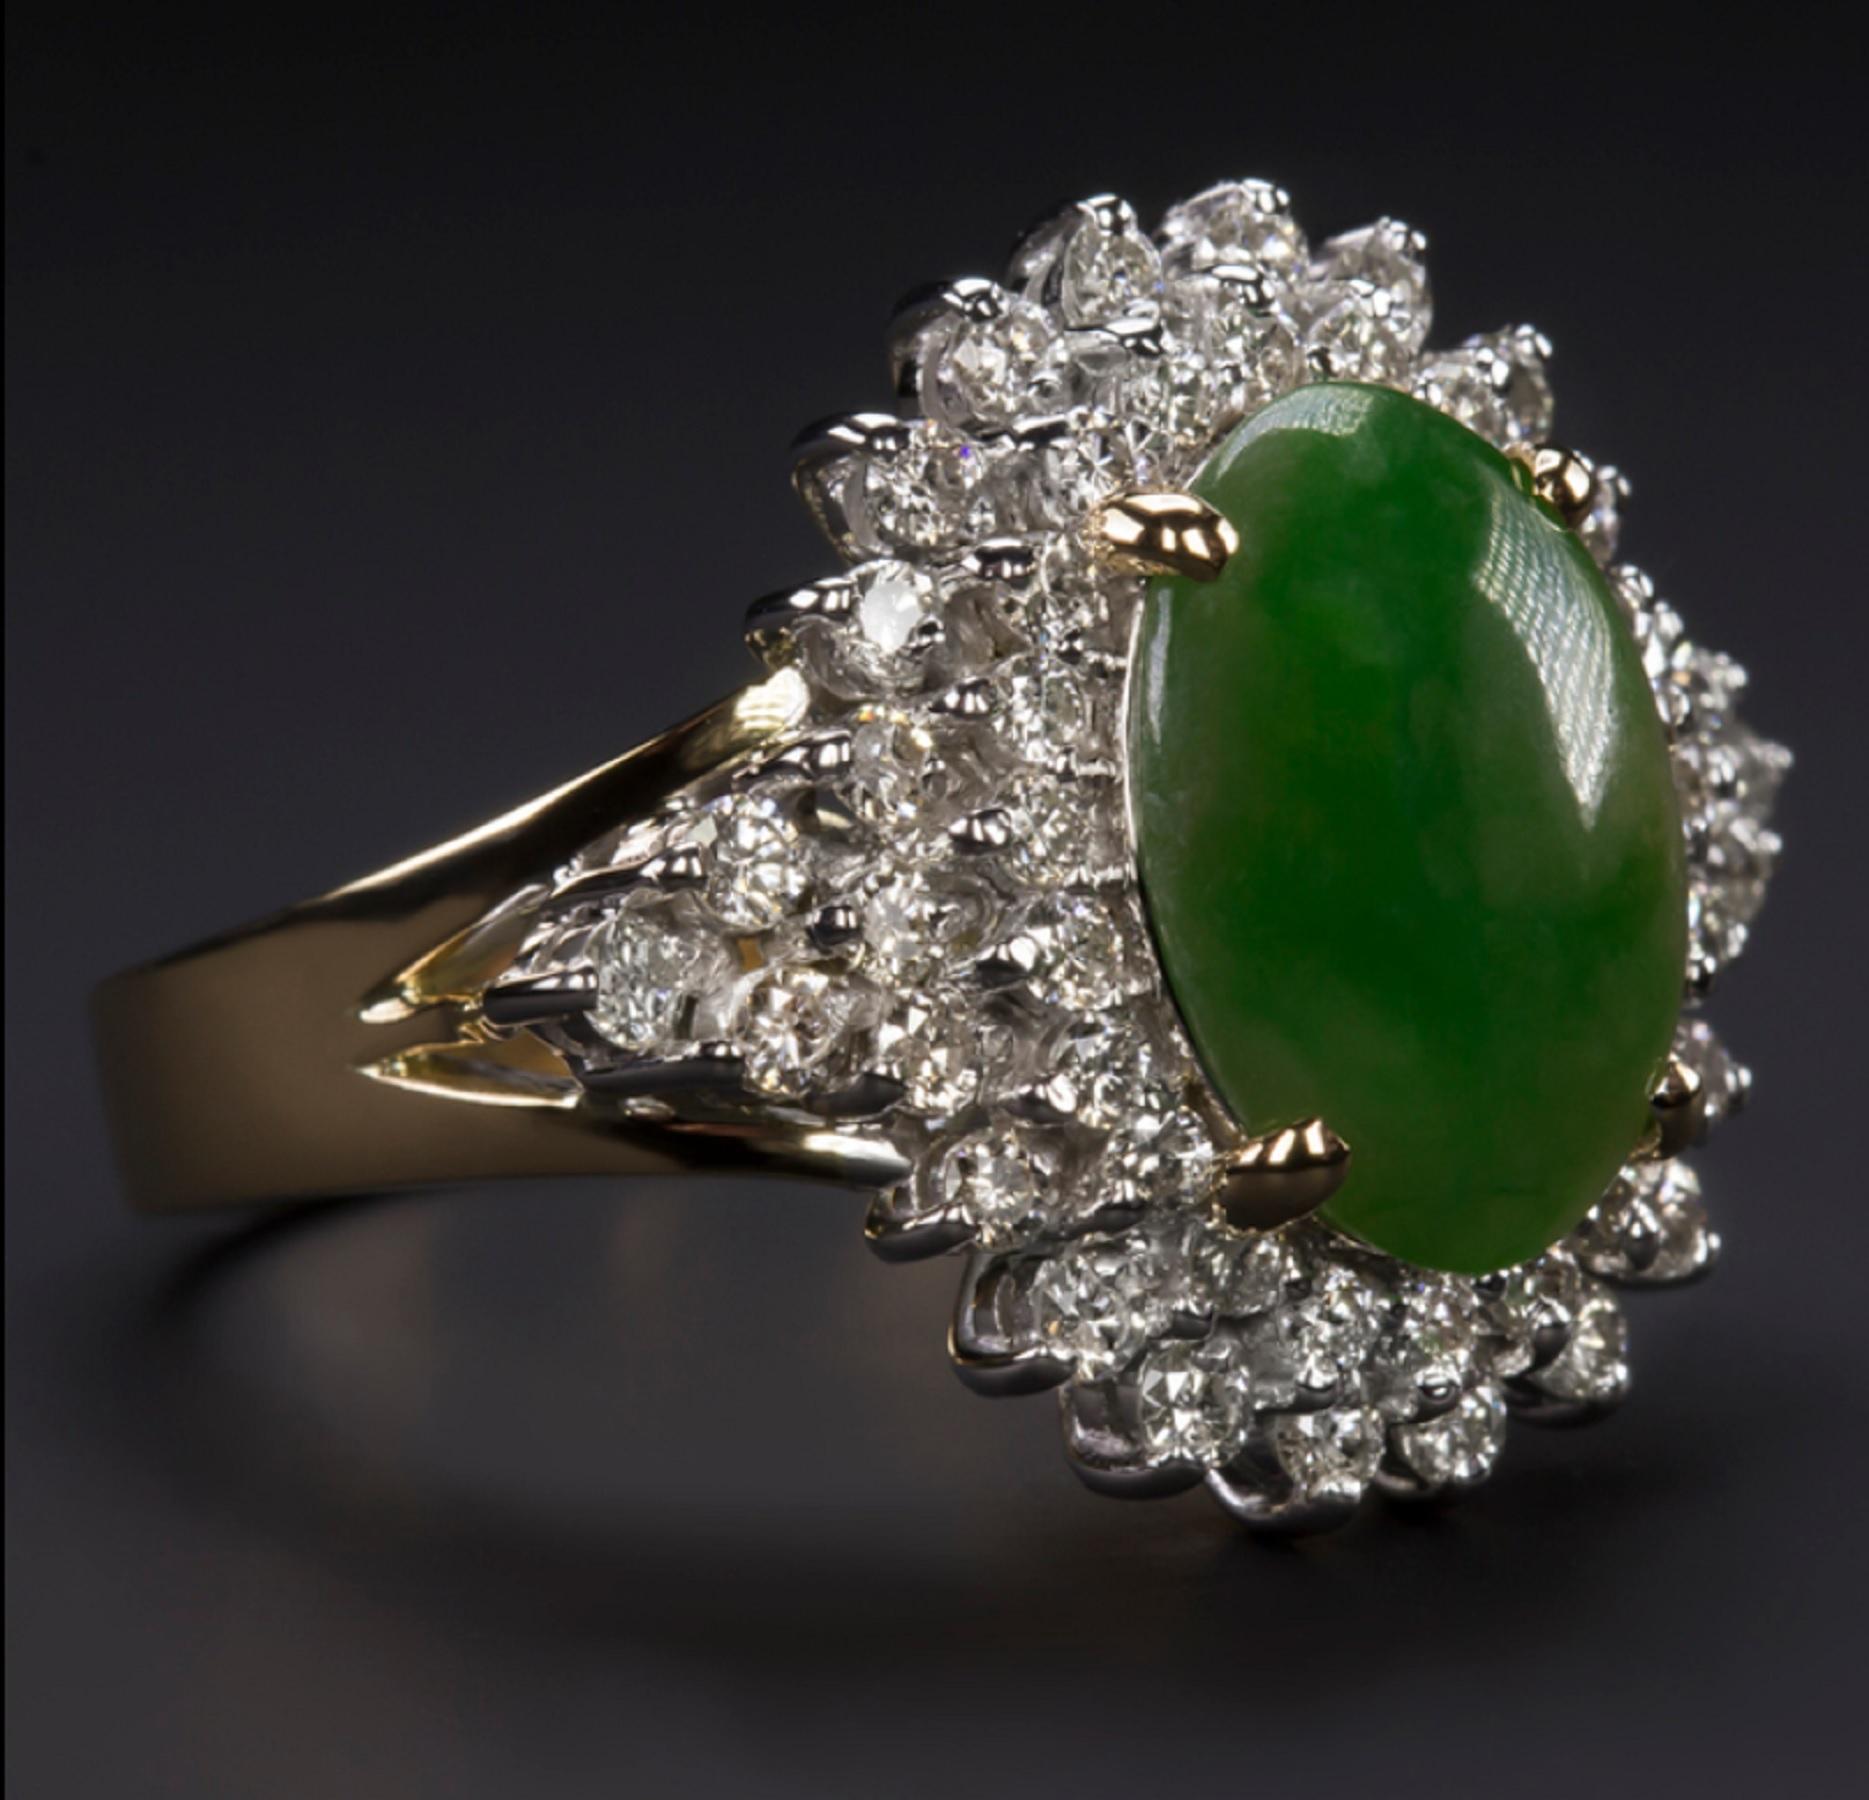  eye-catching original vintage cocktail ring features a gorgeous jade cabochon surrounded by a double halo of vibrant natural diamonds. Measuring 17.5mm across, the ring has a large, statement look! Totaling 1 carat, the diamonds have a very